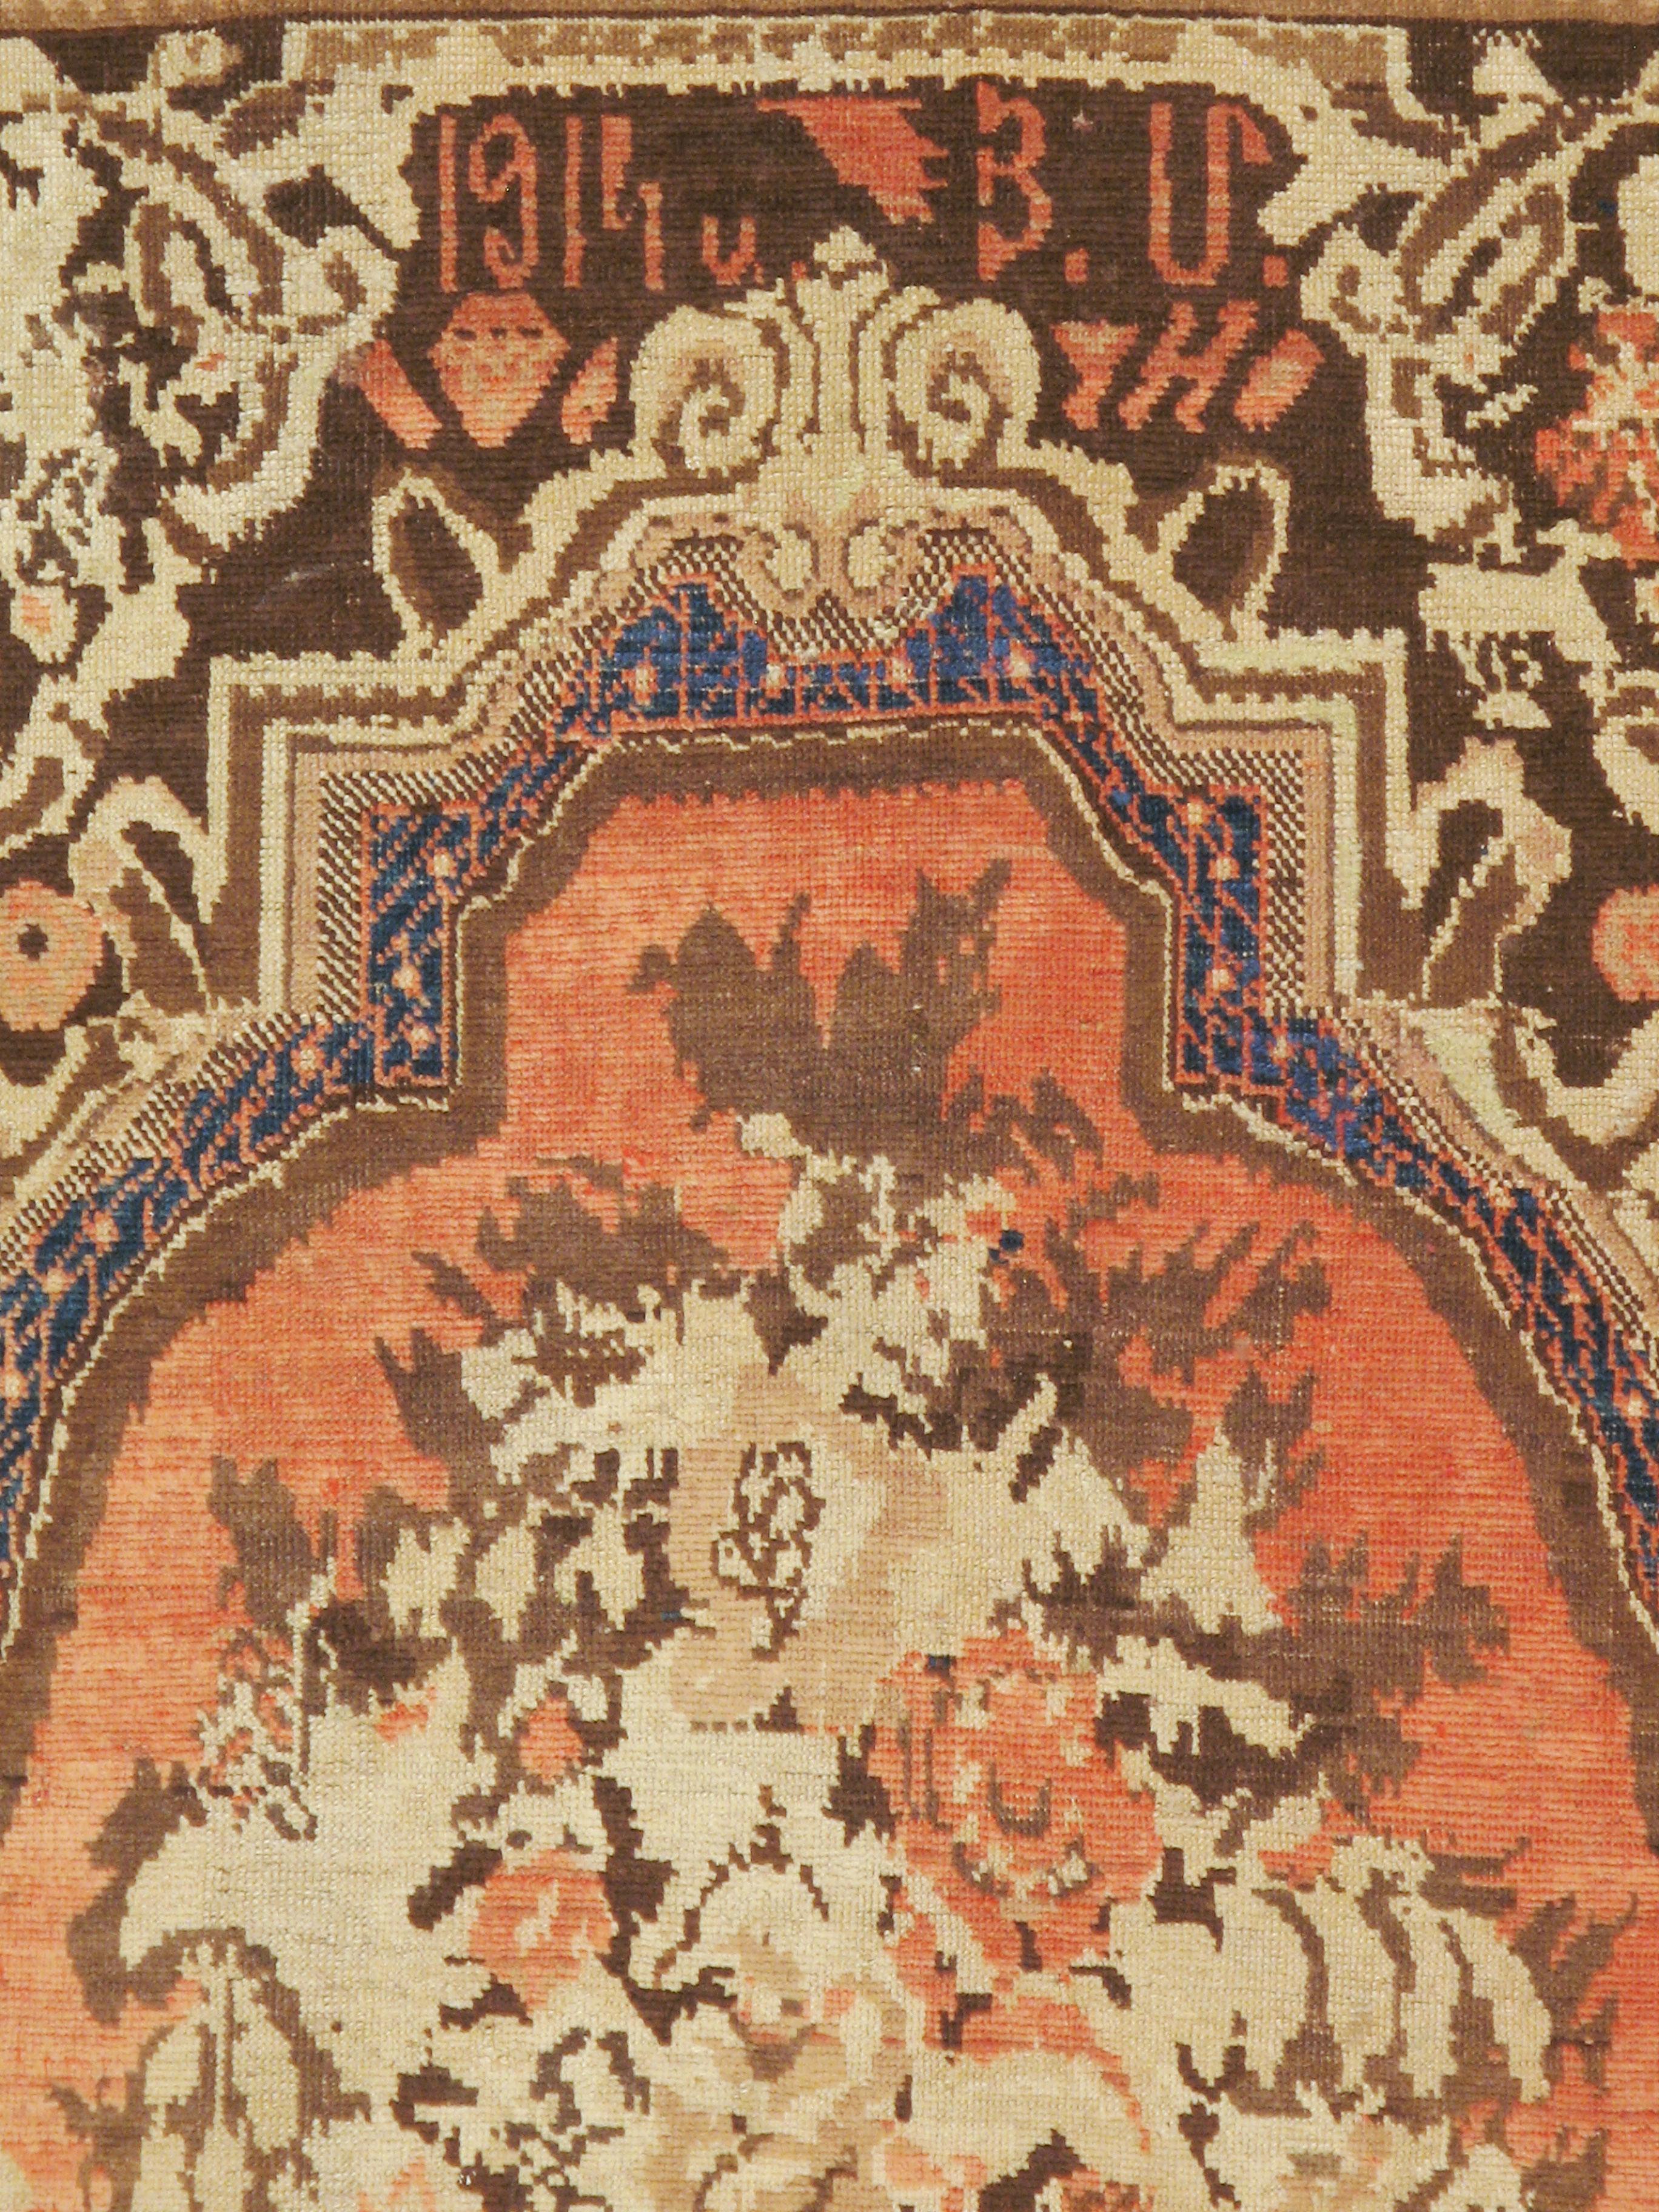 A vintage Caucasian Karabagh rug from the mid-20th century.